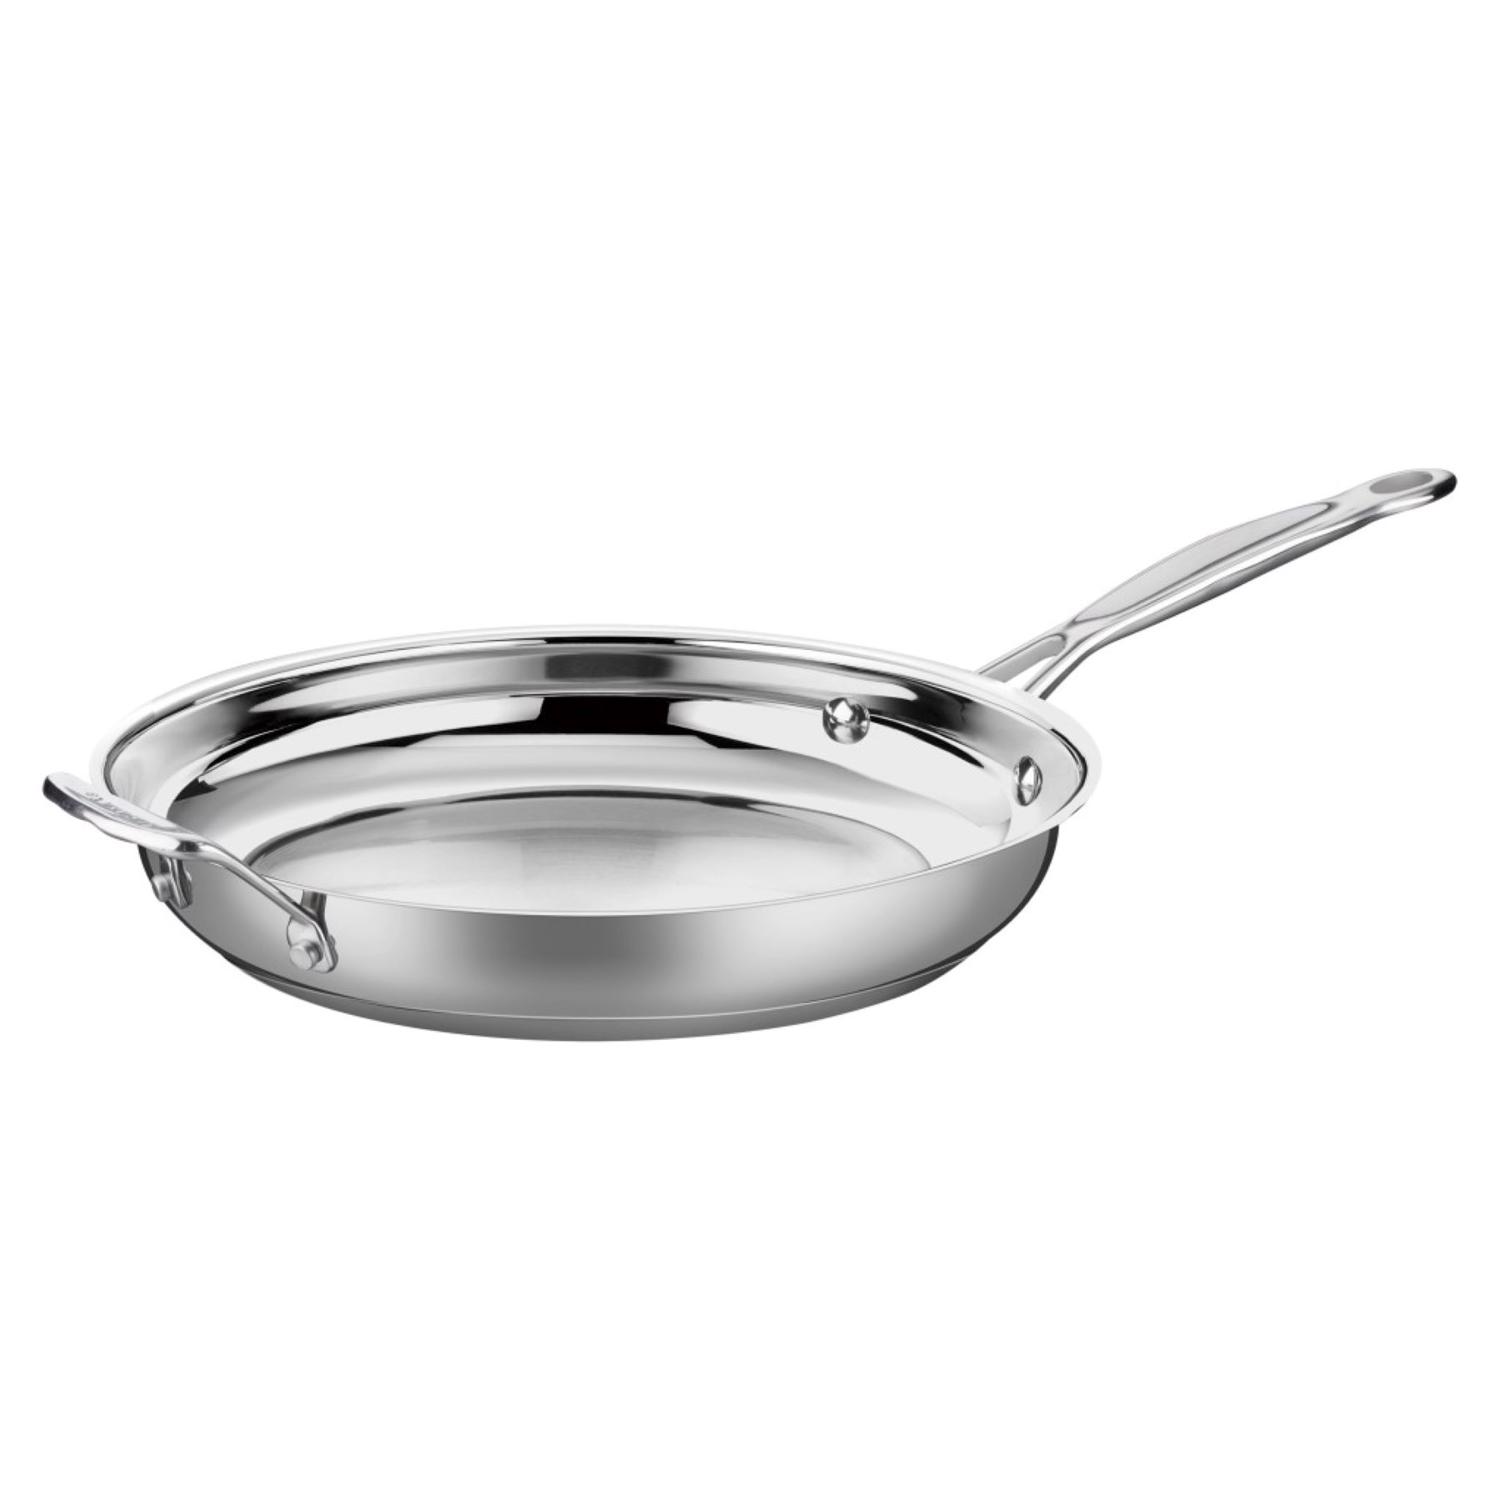 Photos - Other Accessories Cuisinart Chef's Classic Aluminum/Stainless Steel Skillet 12 in. Silver 72 